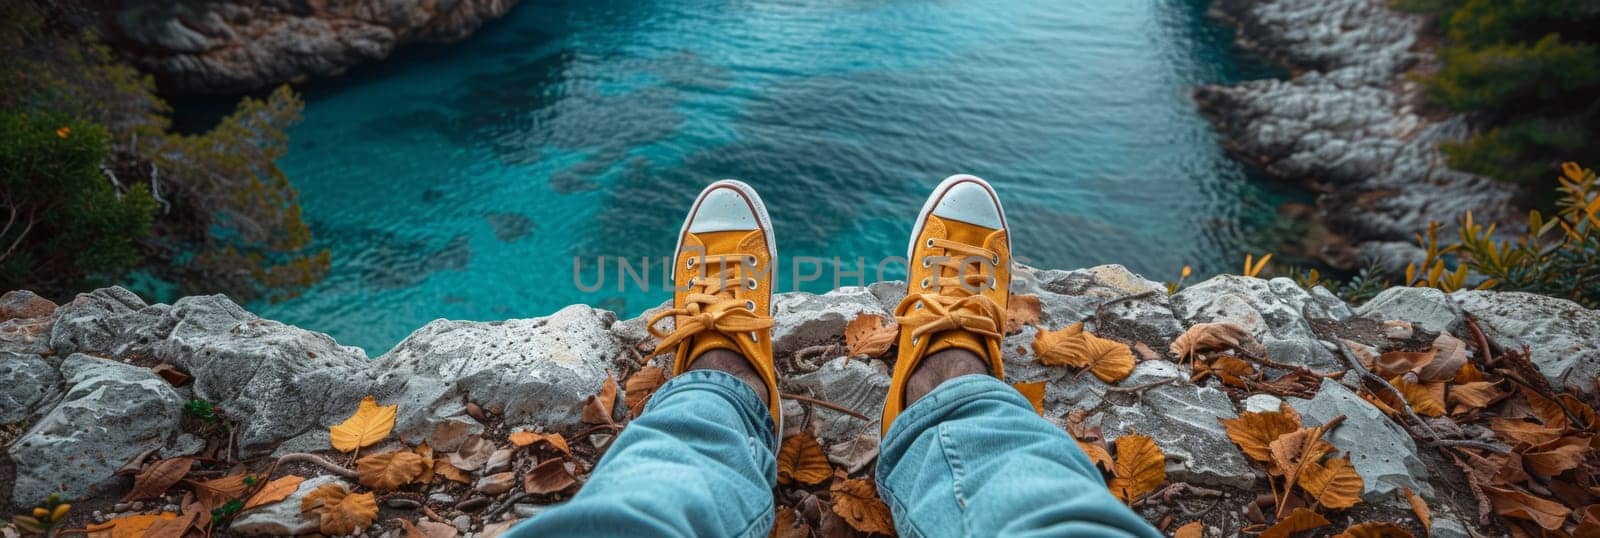 A person wearing yellow sneakers standing on a ledge overlooking water, AI by starush